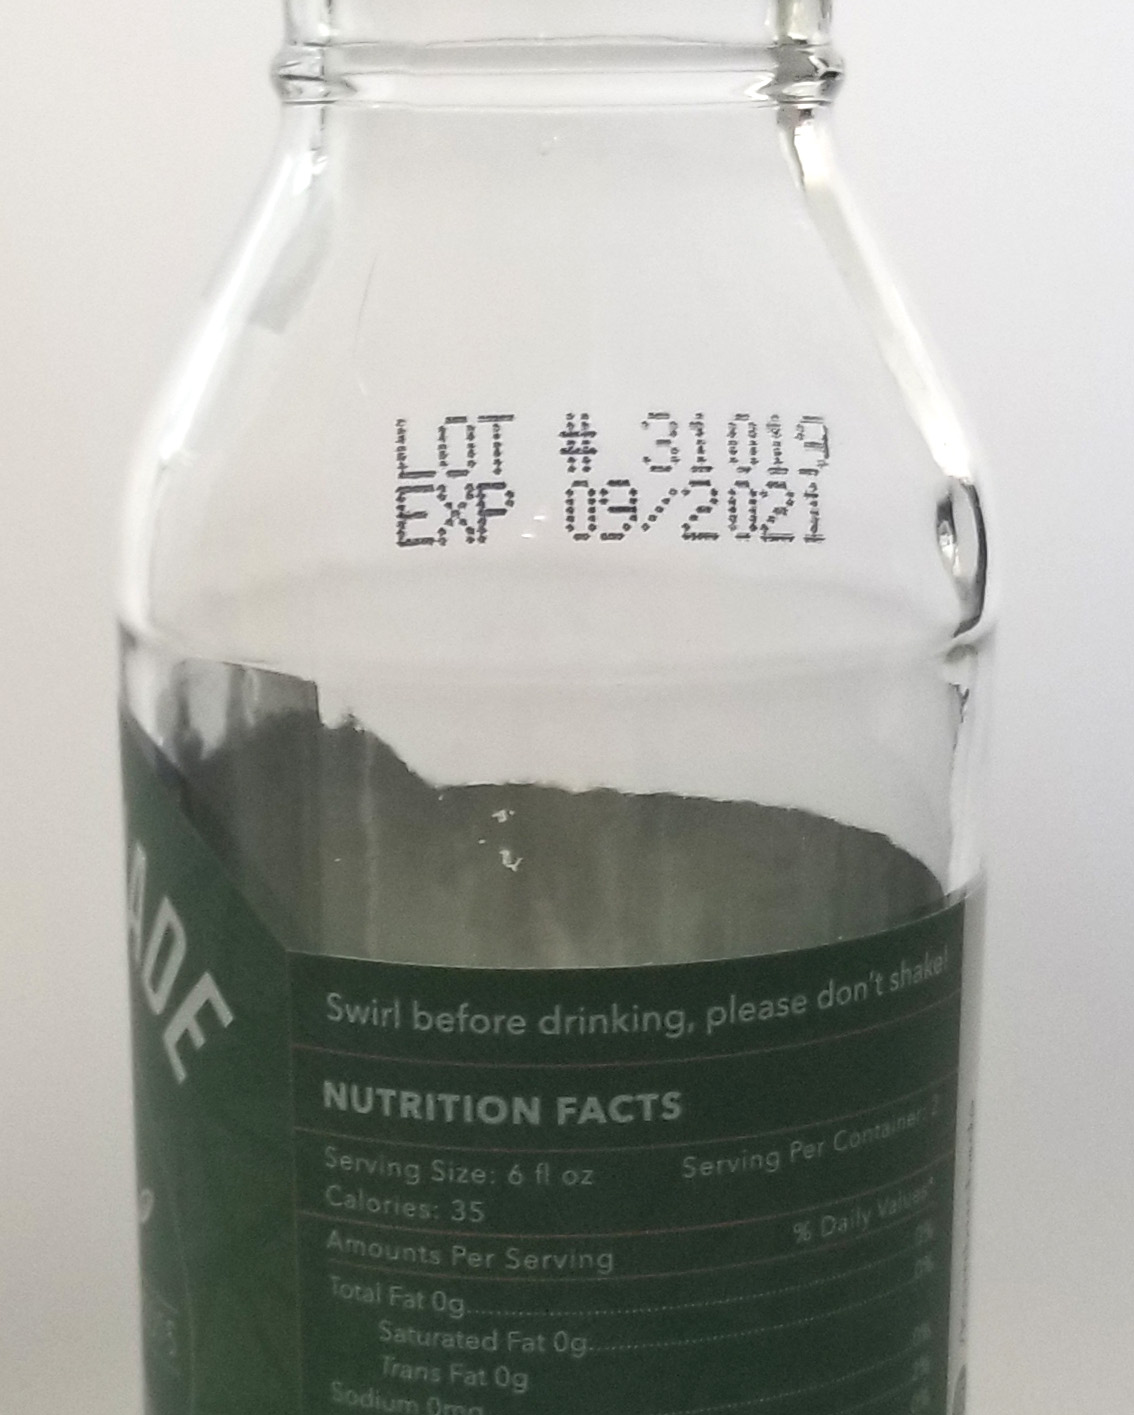 Code printed on a glass bottle